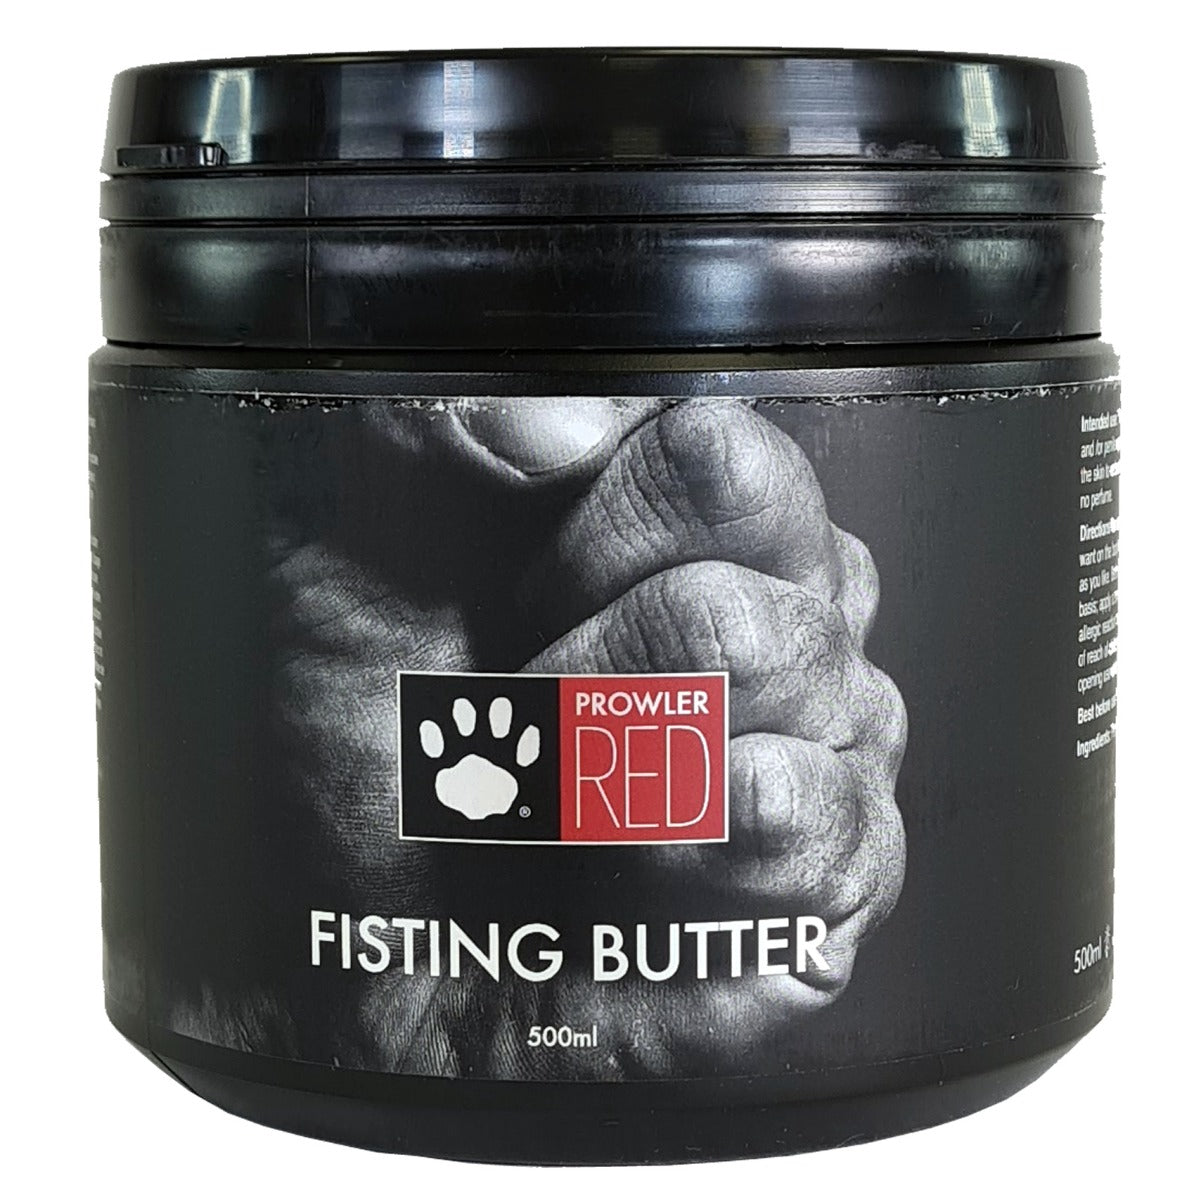 Prowler RED Fisting Butter 500ml (7021023232164)